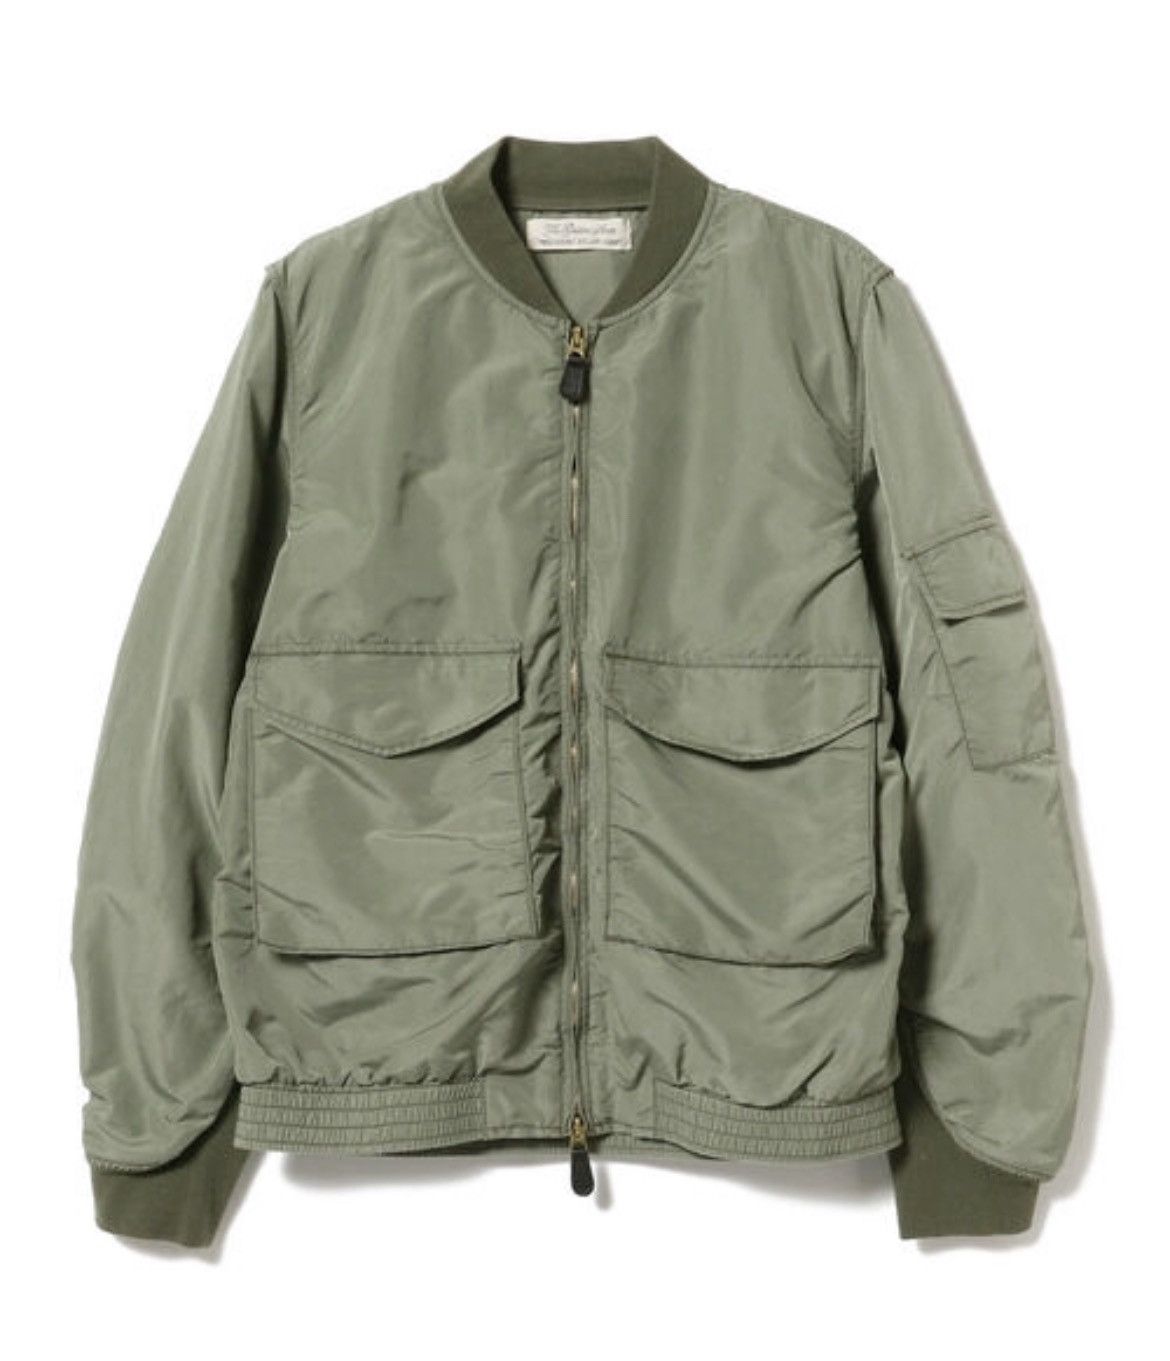 Barbour Barbour X Beams 2 Layer Transport Jacket Size 36 | Grailed